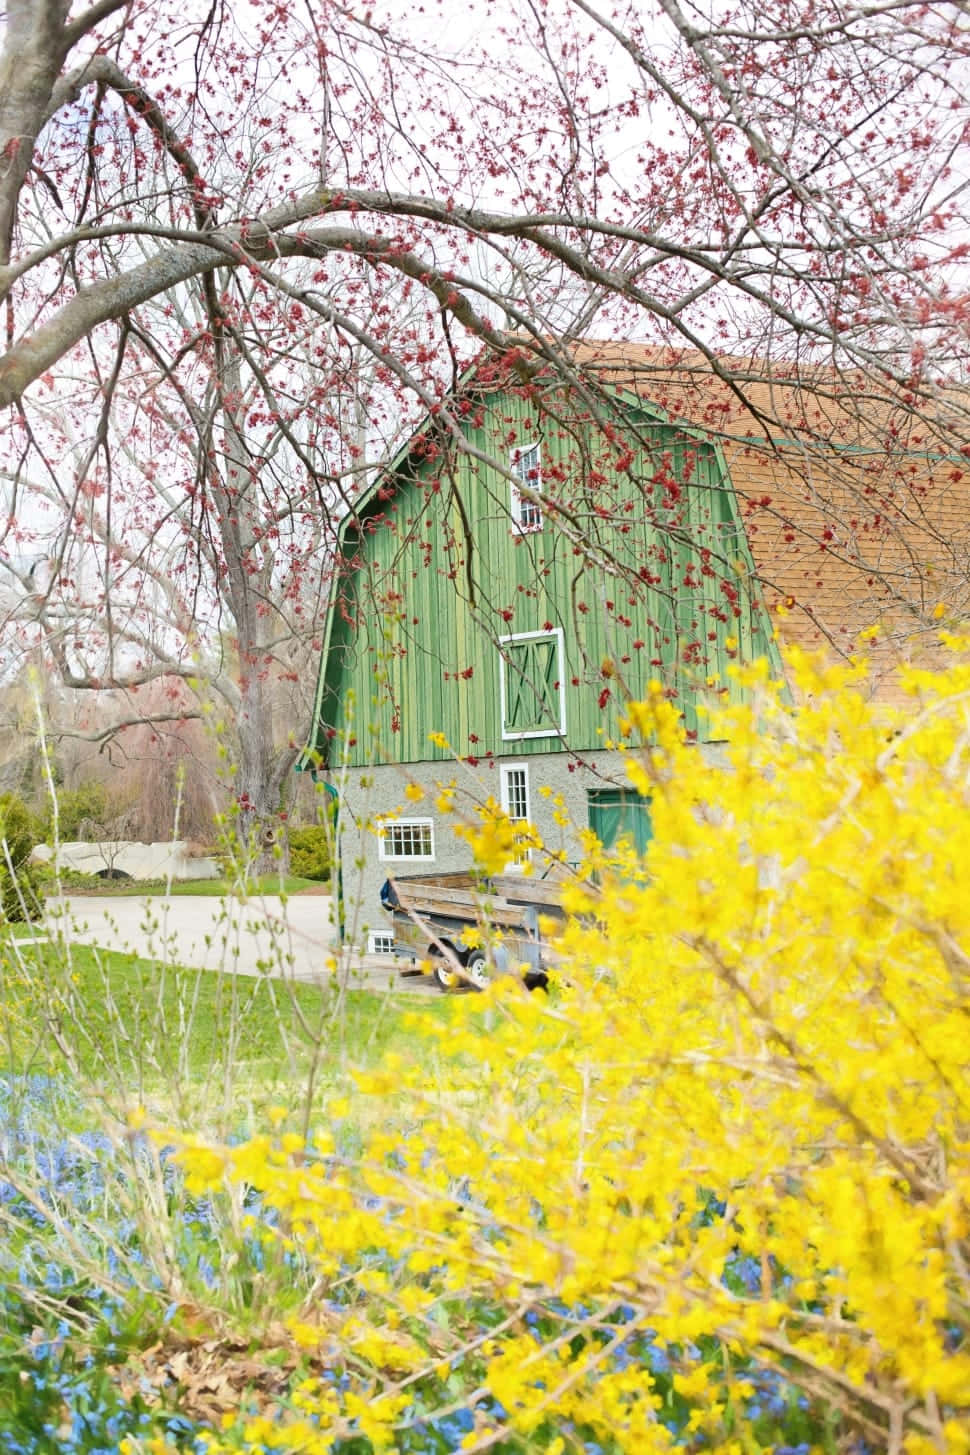 A Green Barn With A Yellow Flower